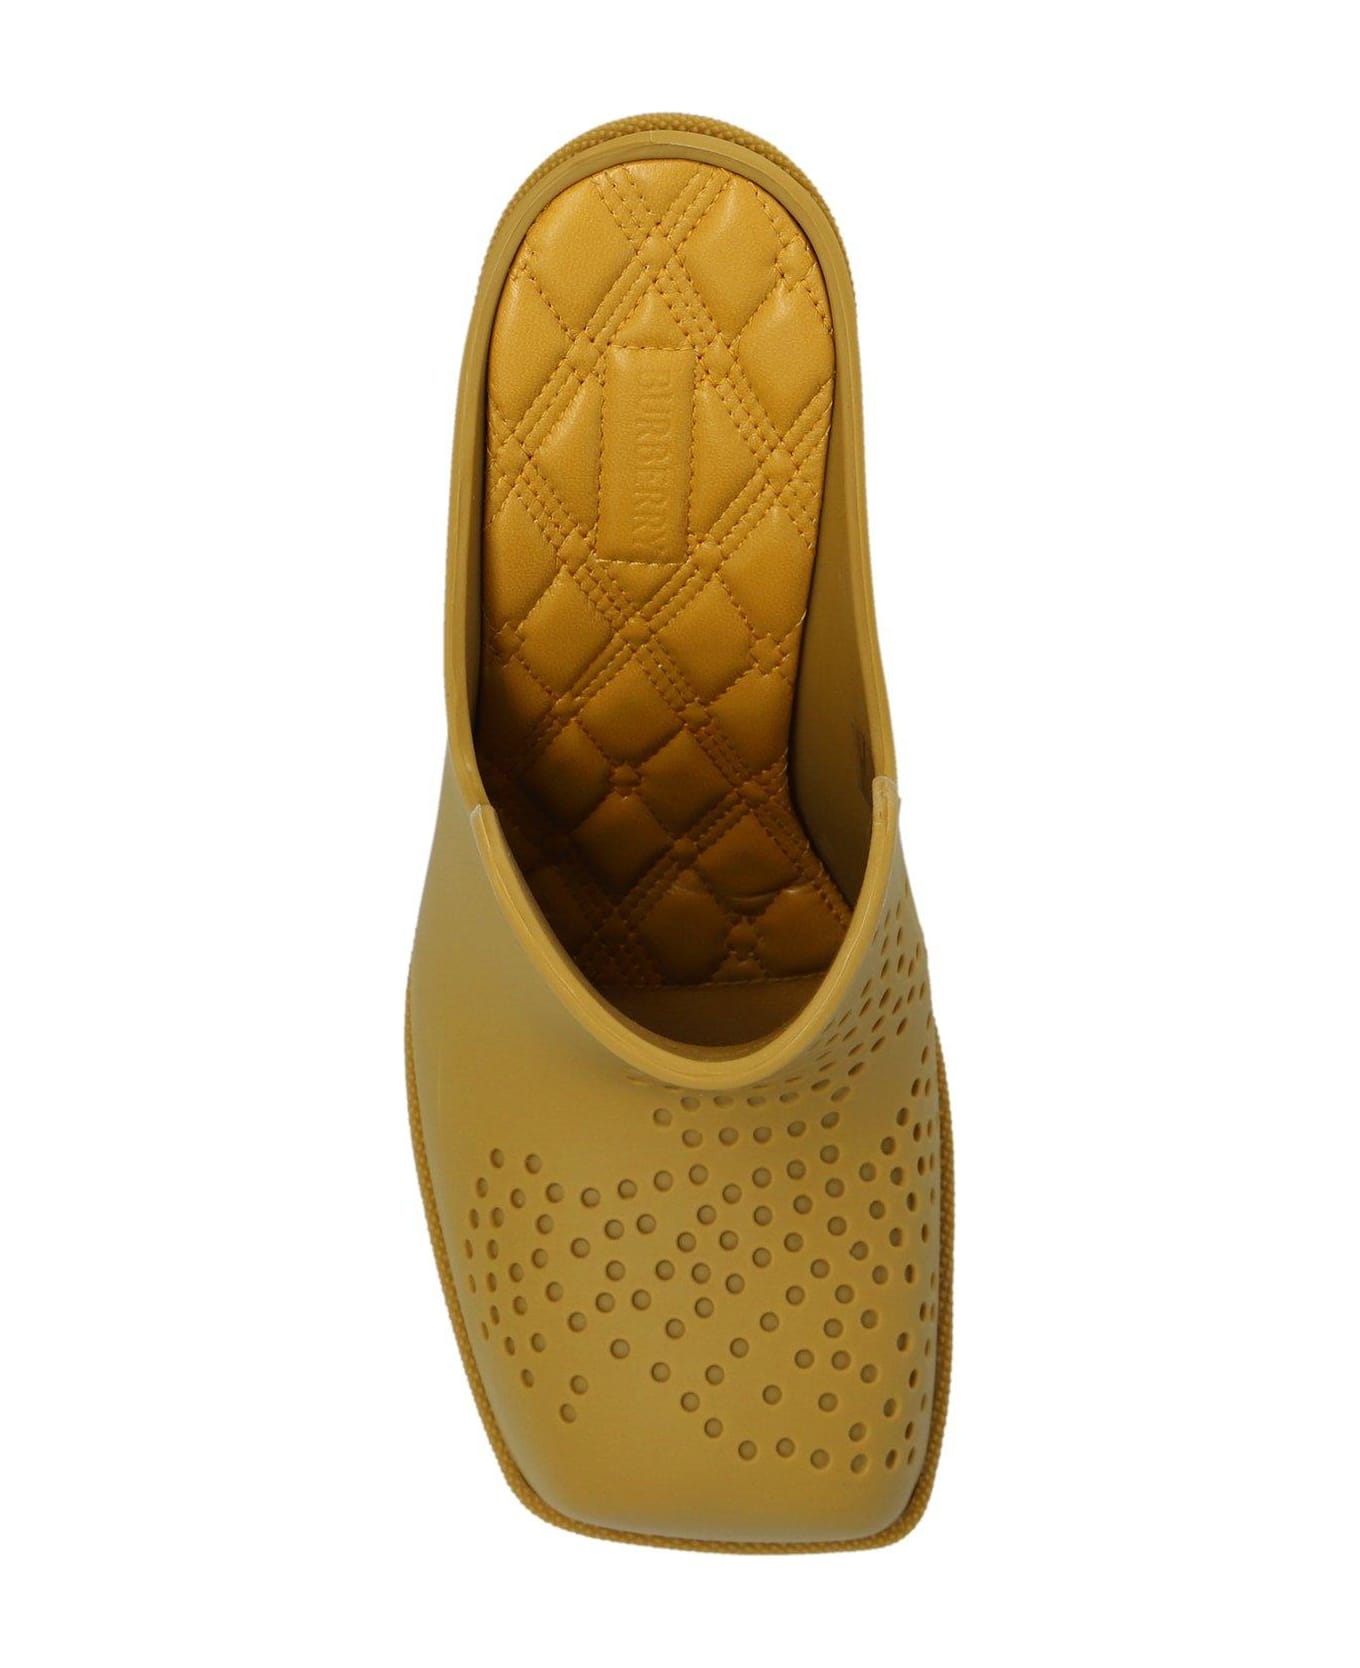 Burberry Highland Perforated Detailed Mules - YELLOW サンダル